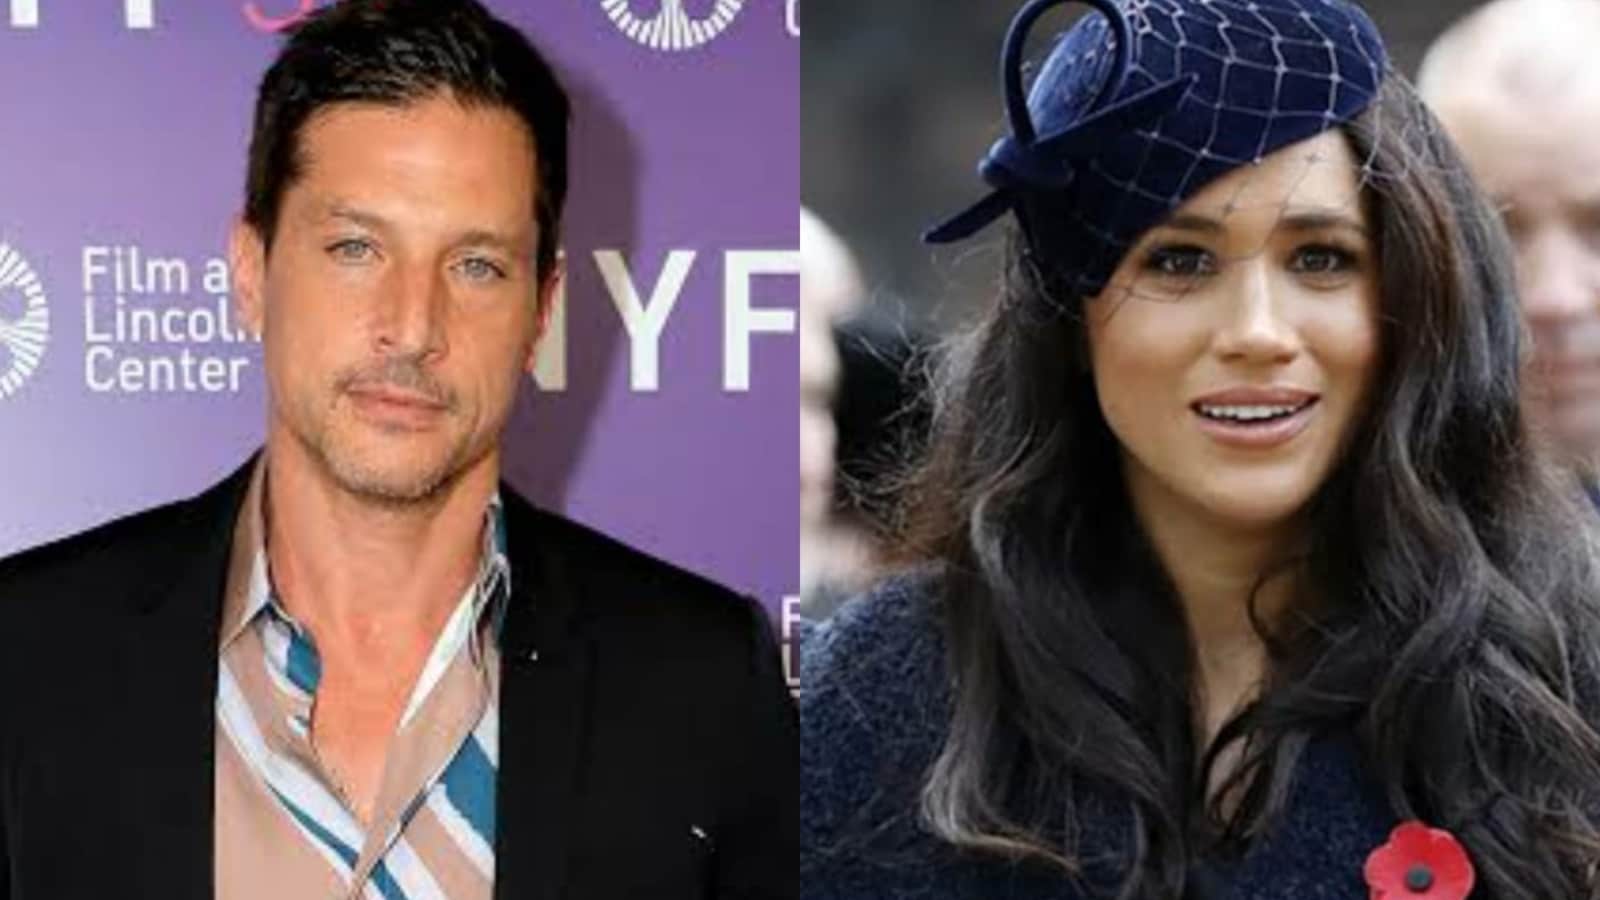 Meghan Markle’s former co-star Simon Rex says he was offered ₹50 lakh by tabloids to claim he slept with her